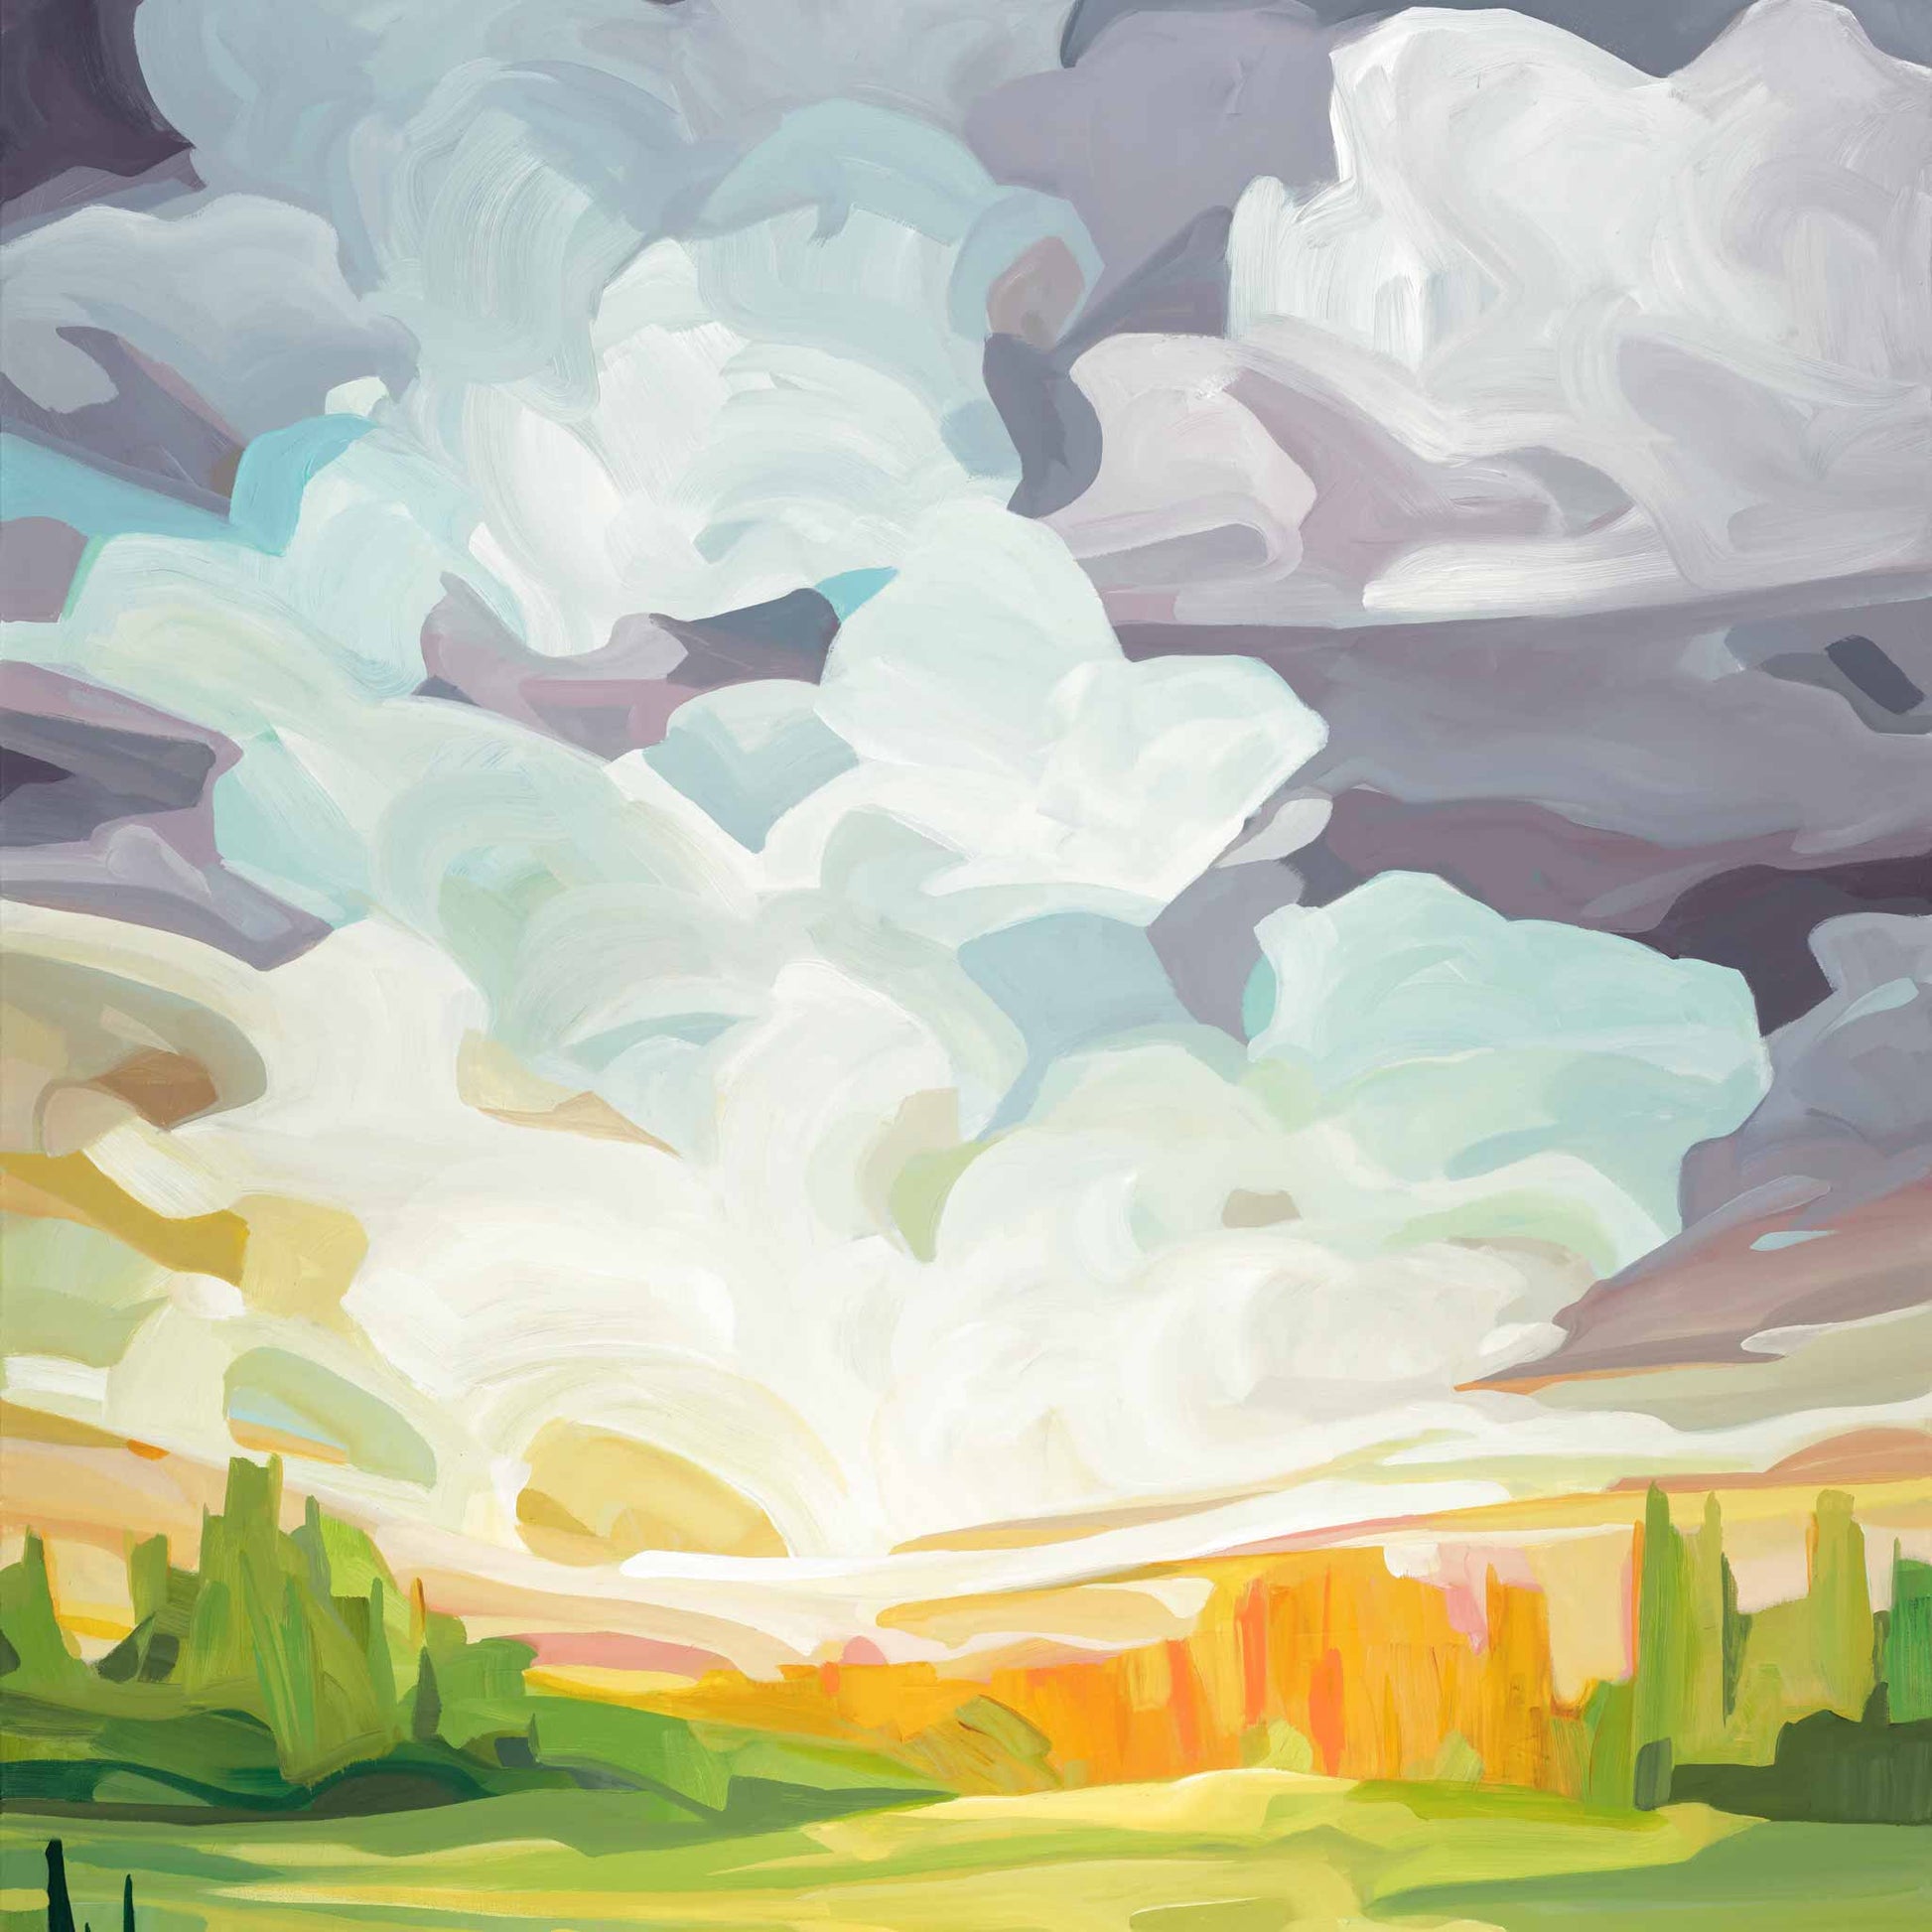 Acrylic sky painting of a misty morning sky painted by Canadian artist Susannah Bleasby